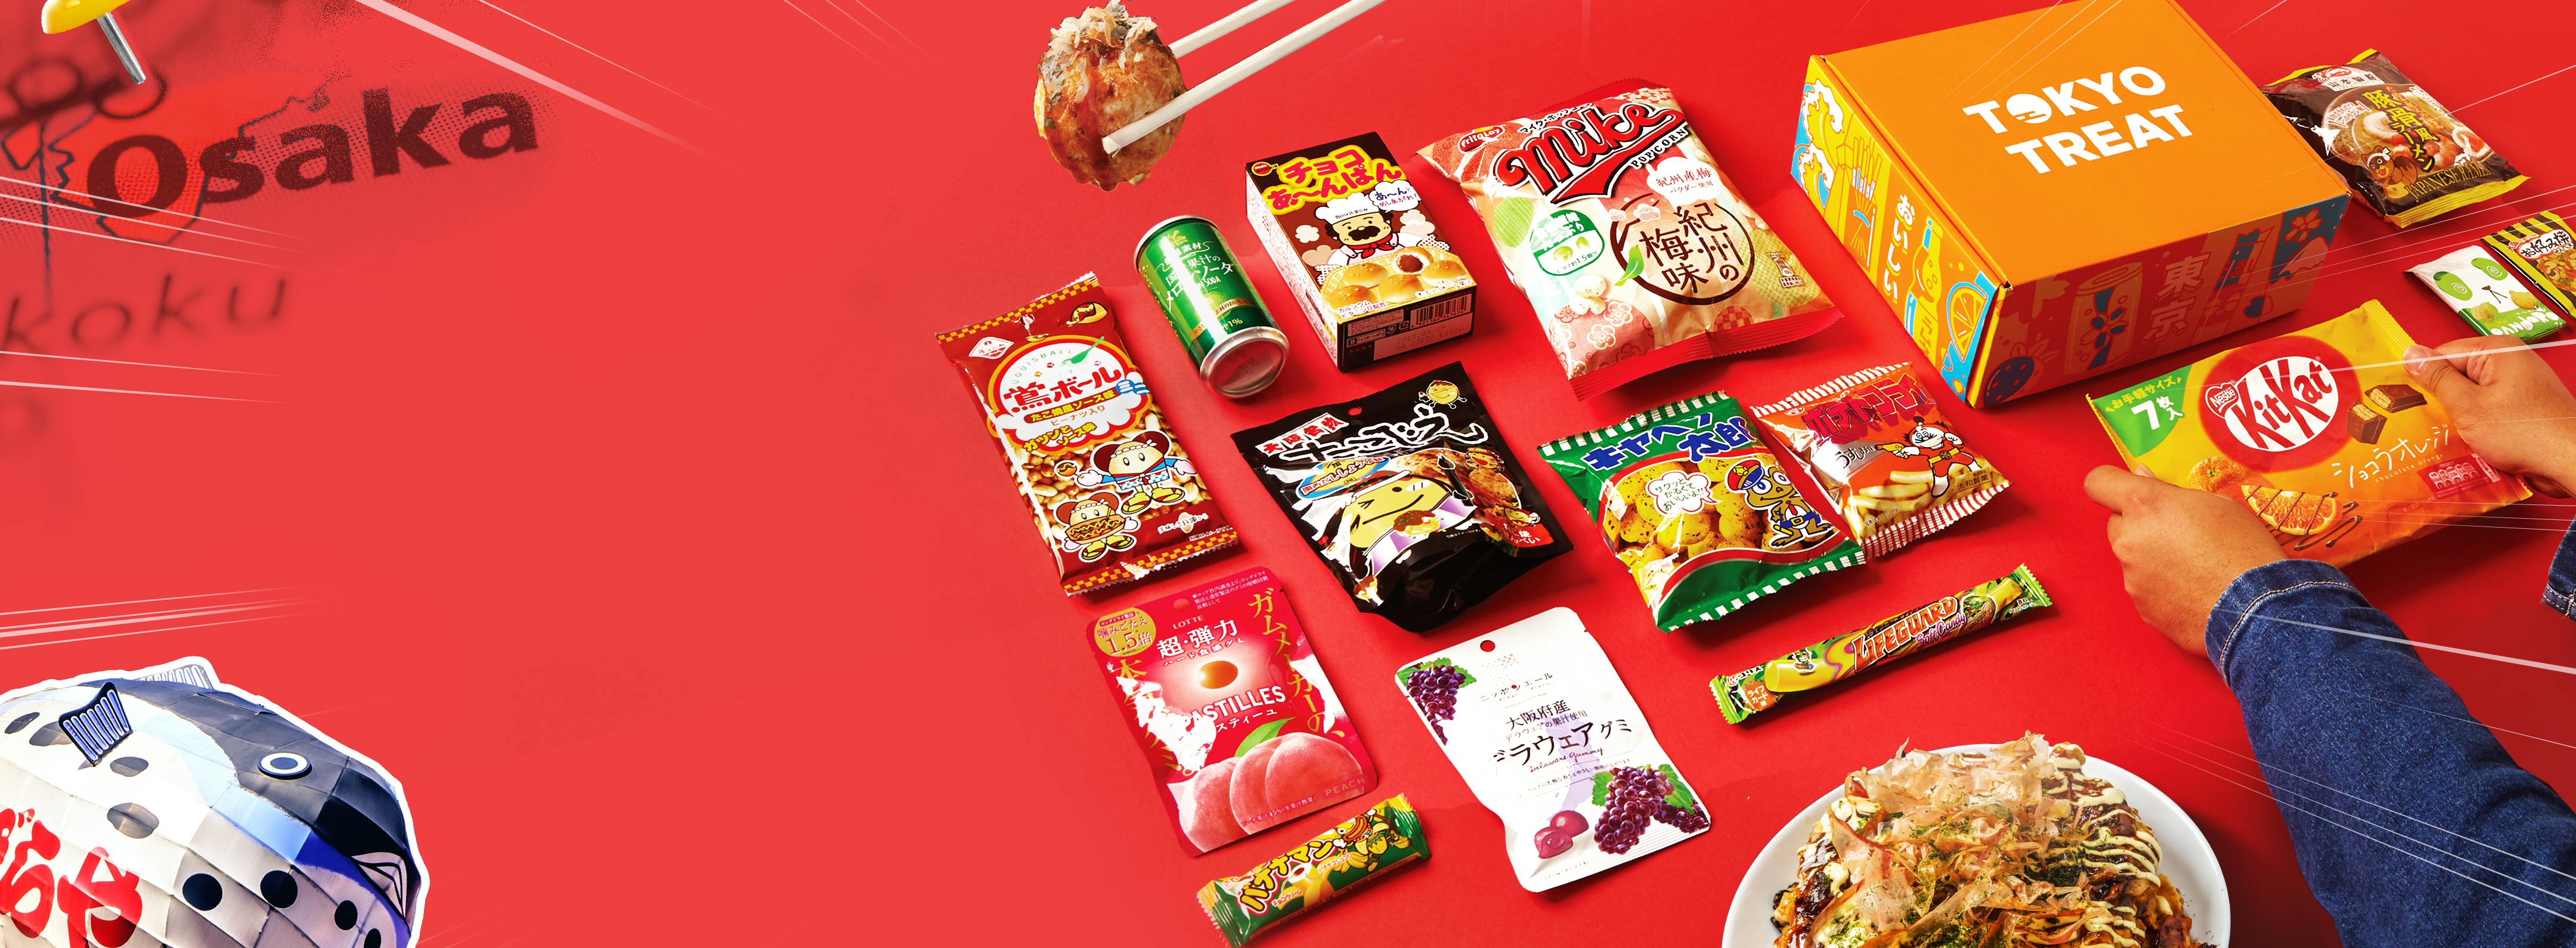 TokyoTreat's 2023 June Osaka snack box is featured on a red map of Japan with KitKat and other exclusive limited edition Japanese treats